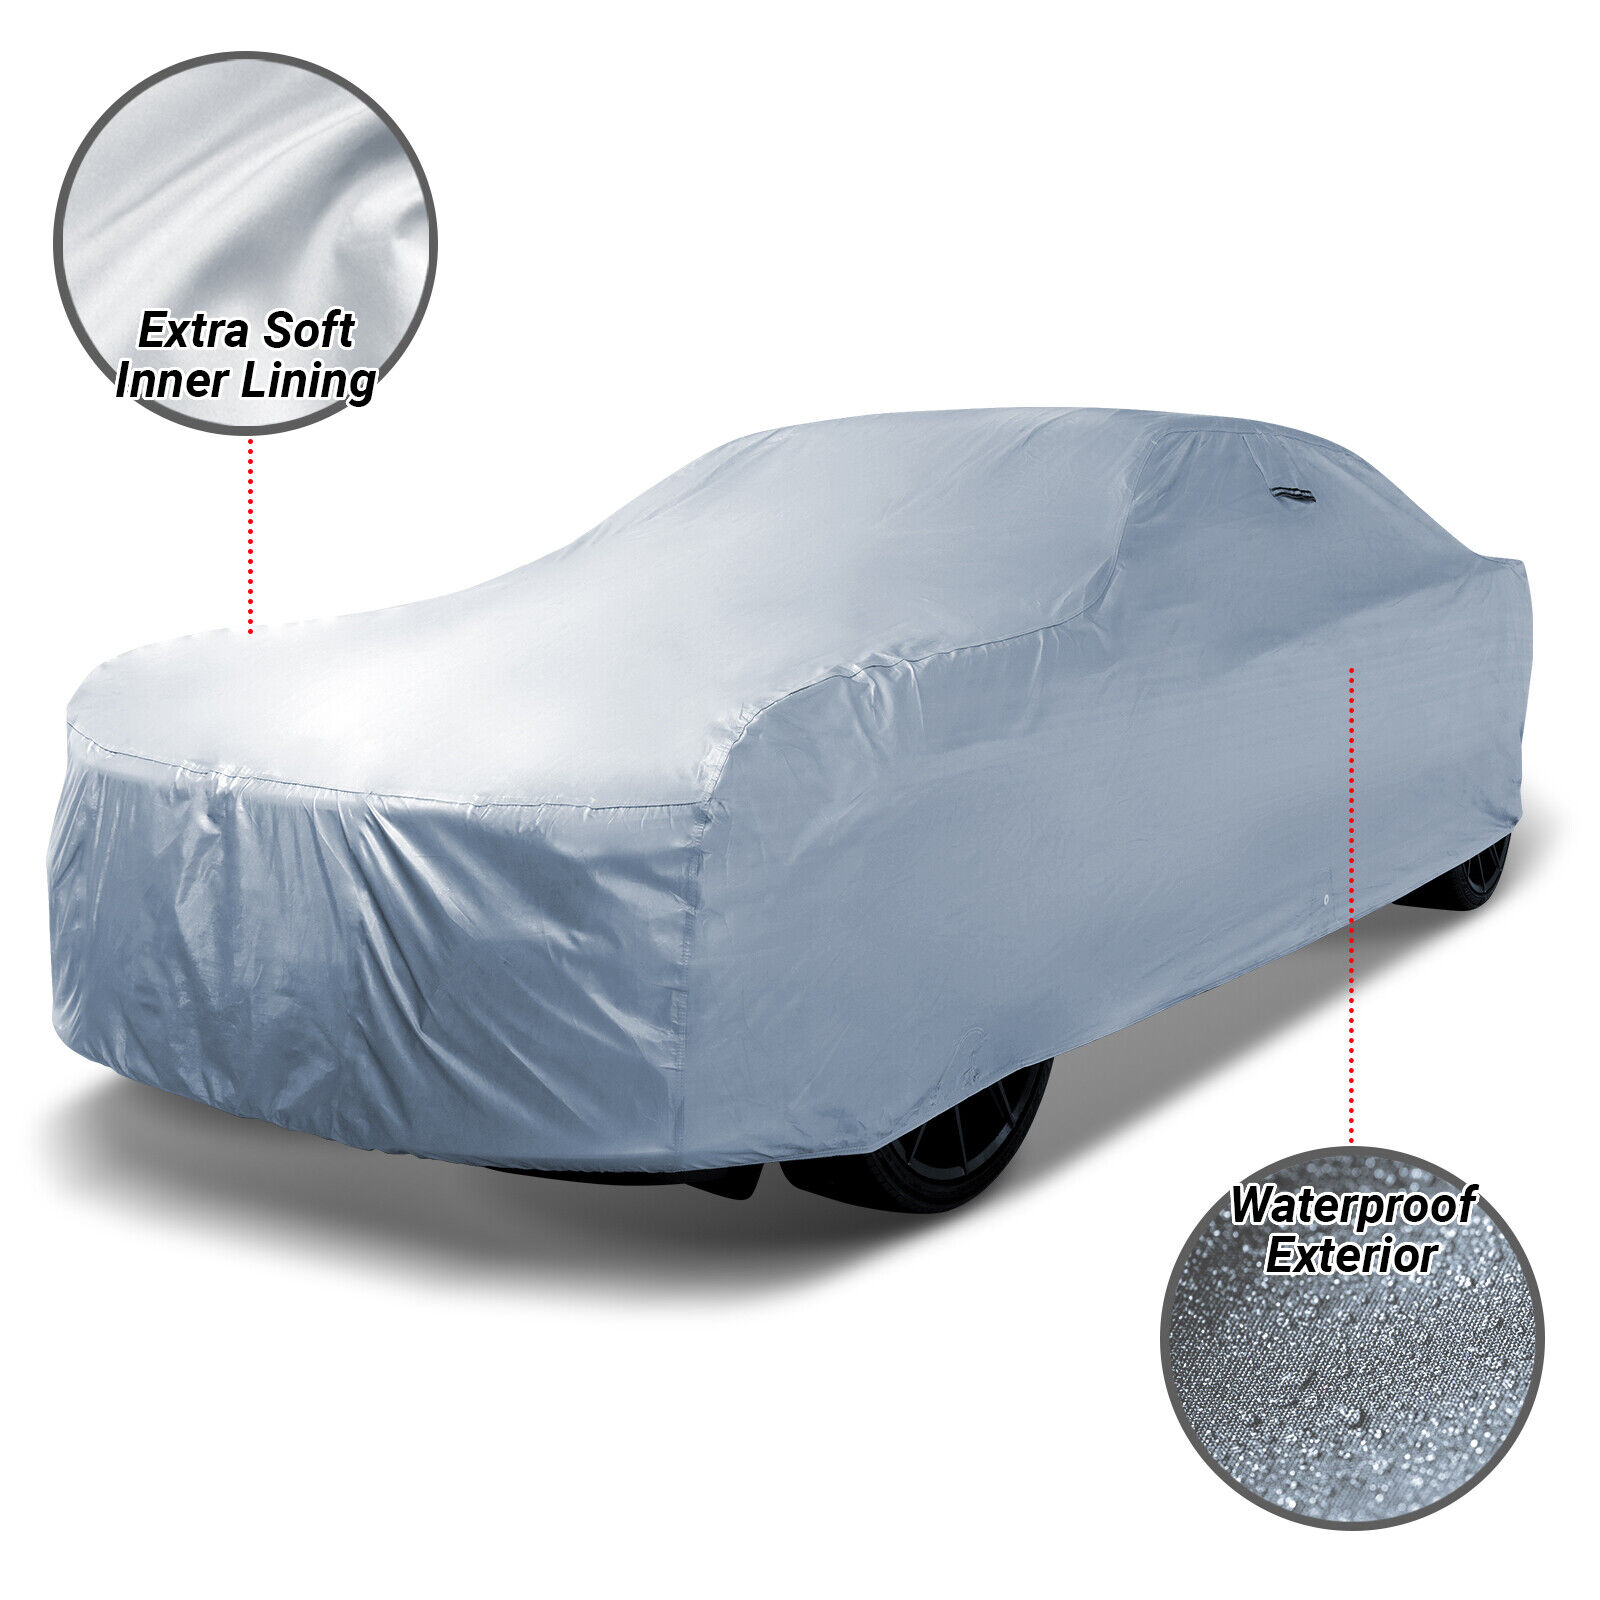 100% Waterproof / All Weather [DODGE CHARGER] Warranty Premium Custom Car Cover